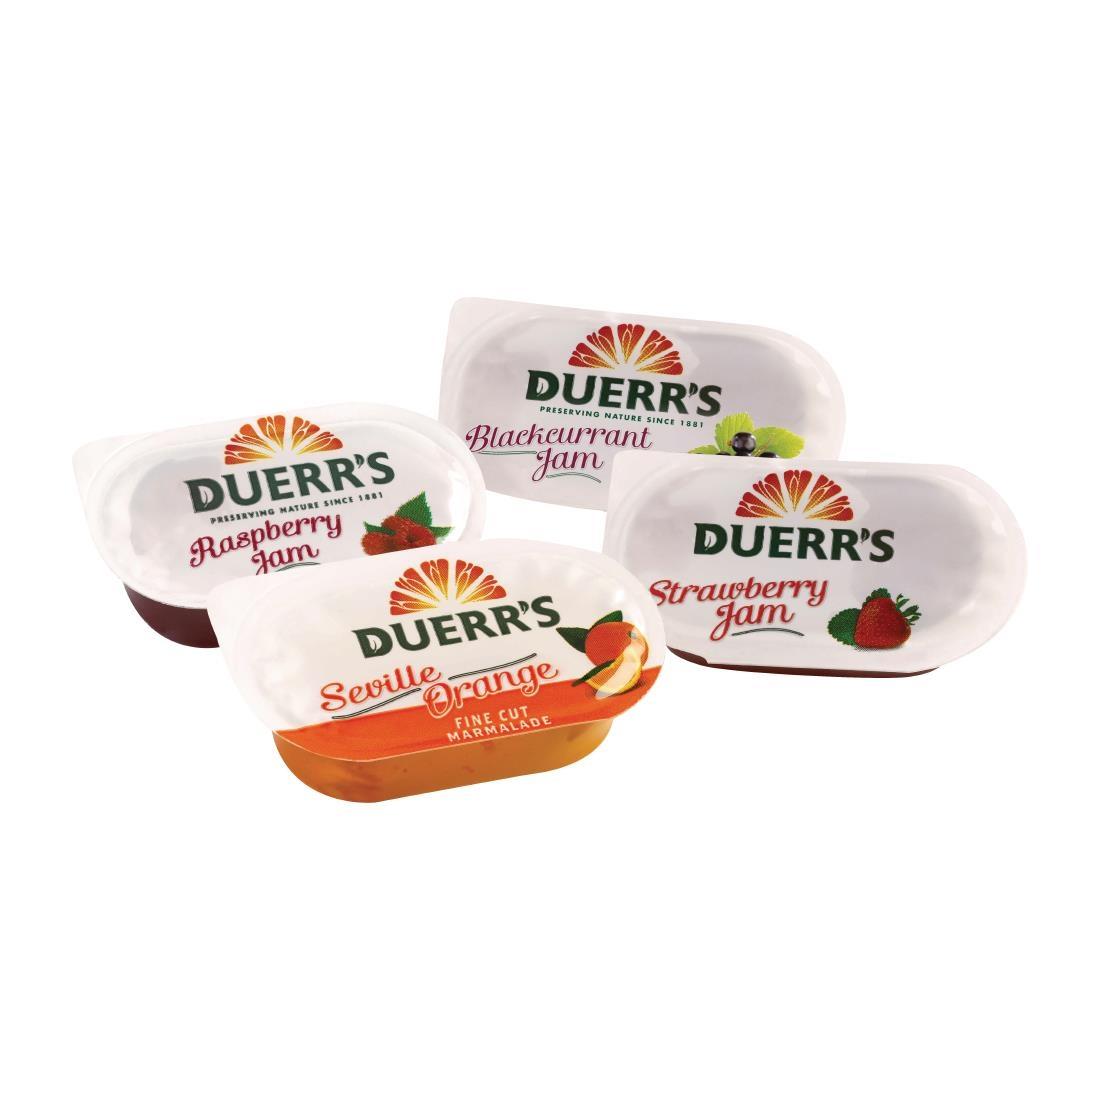 Duerrs Assorted Jam & Marmalade 20g (Pack of 96) - FW988  - 1